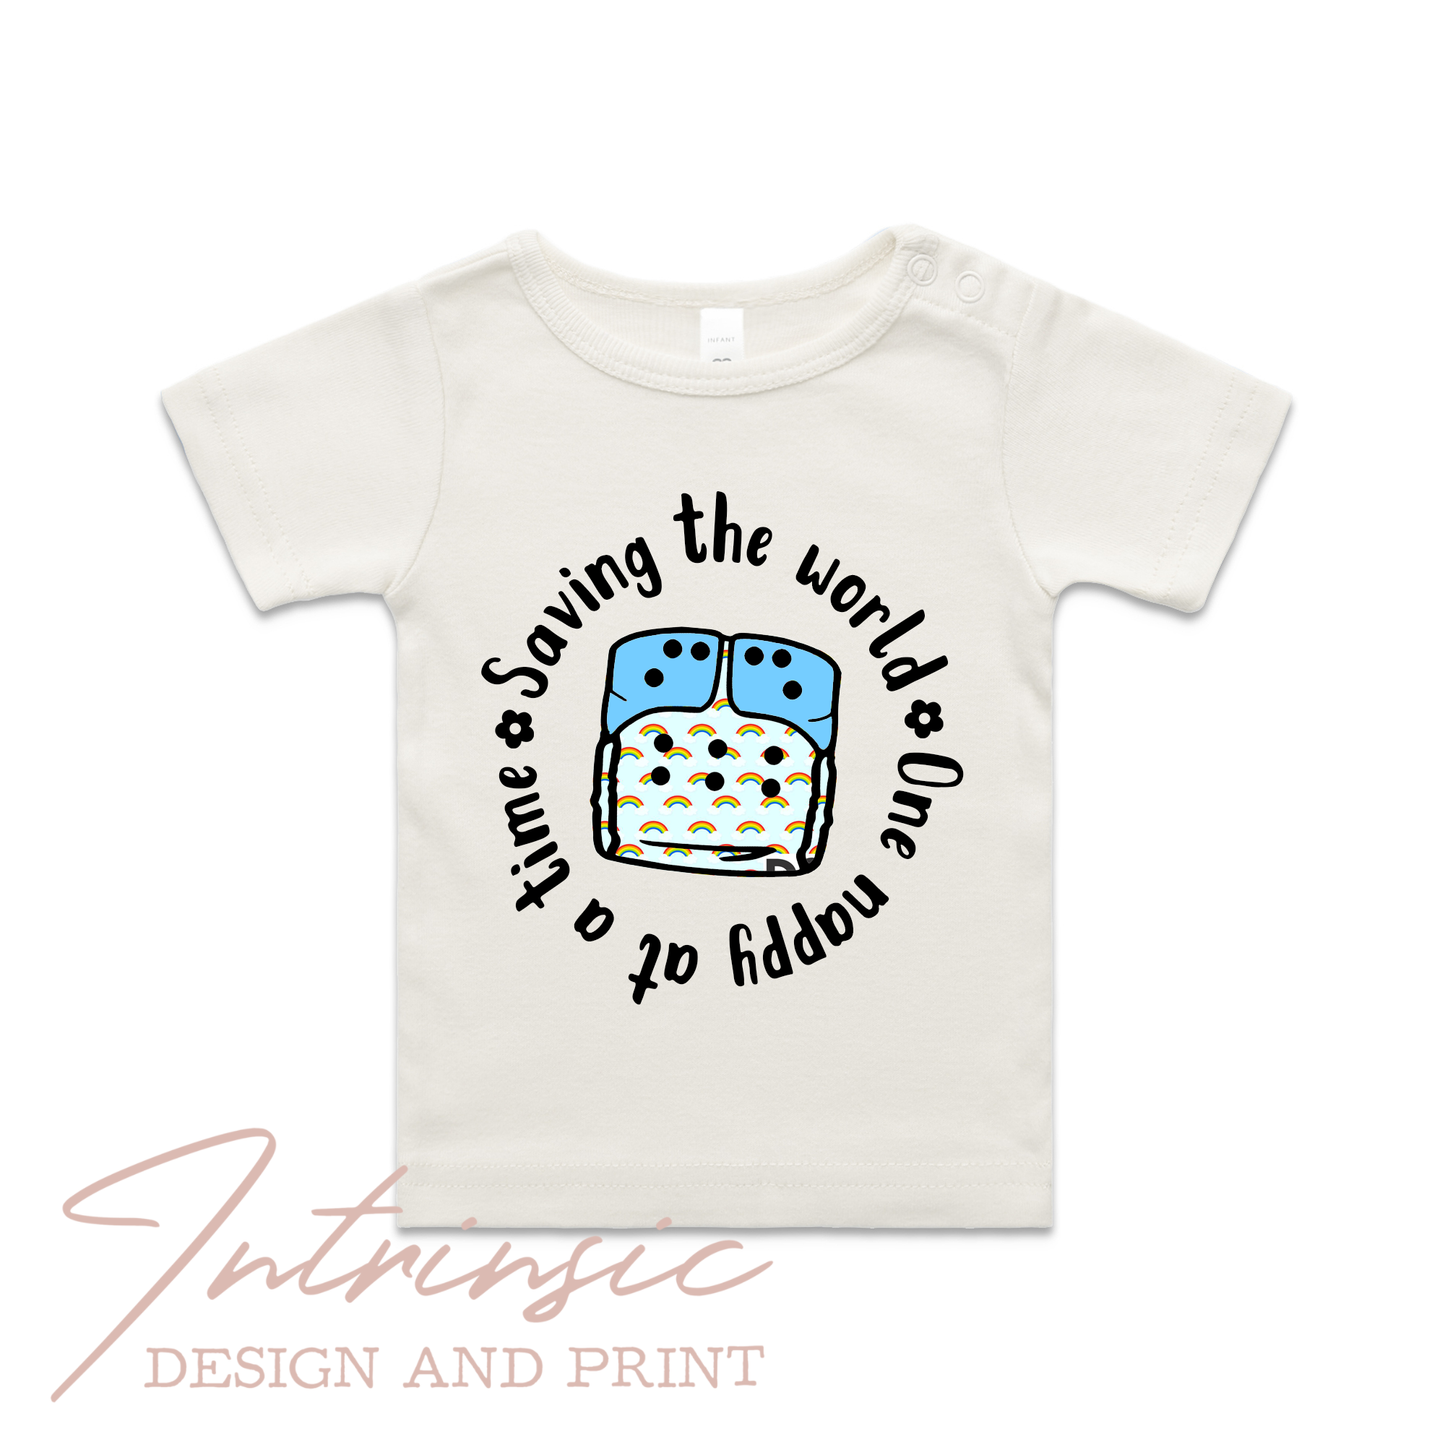 Saving the world filled printed nappy tee